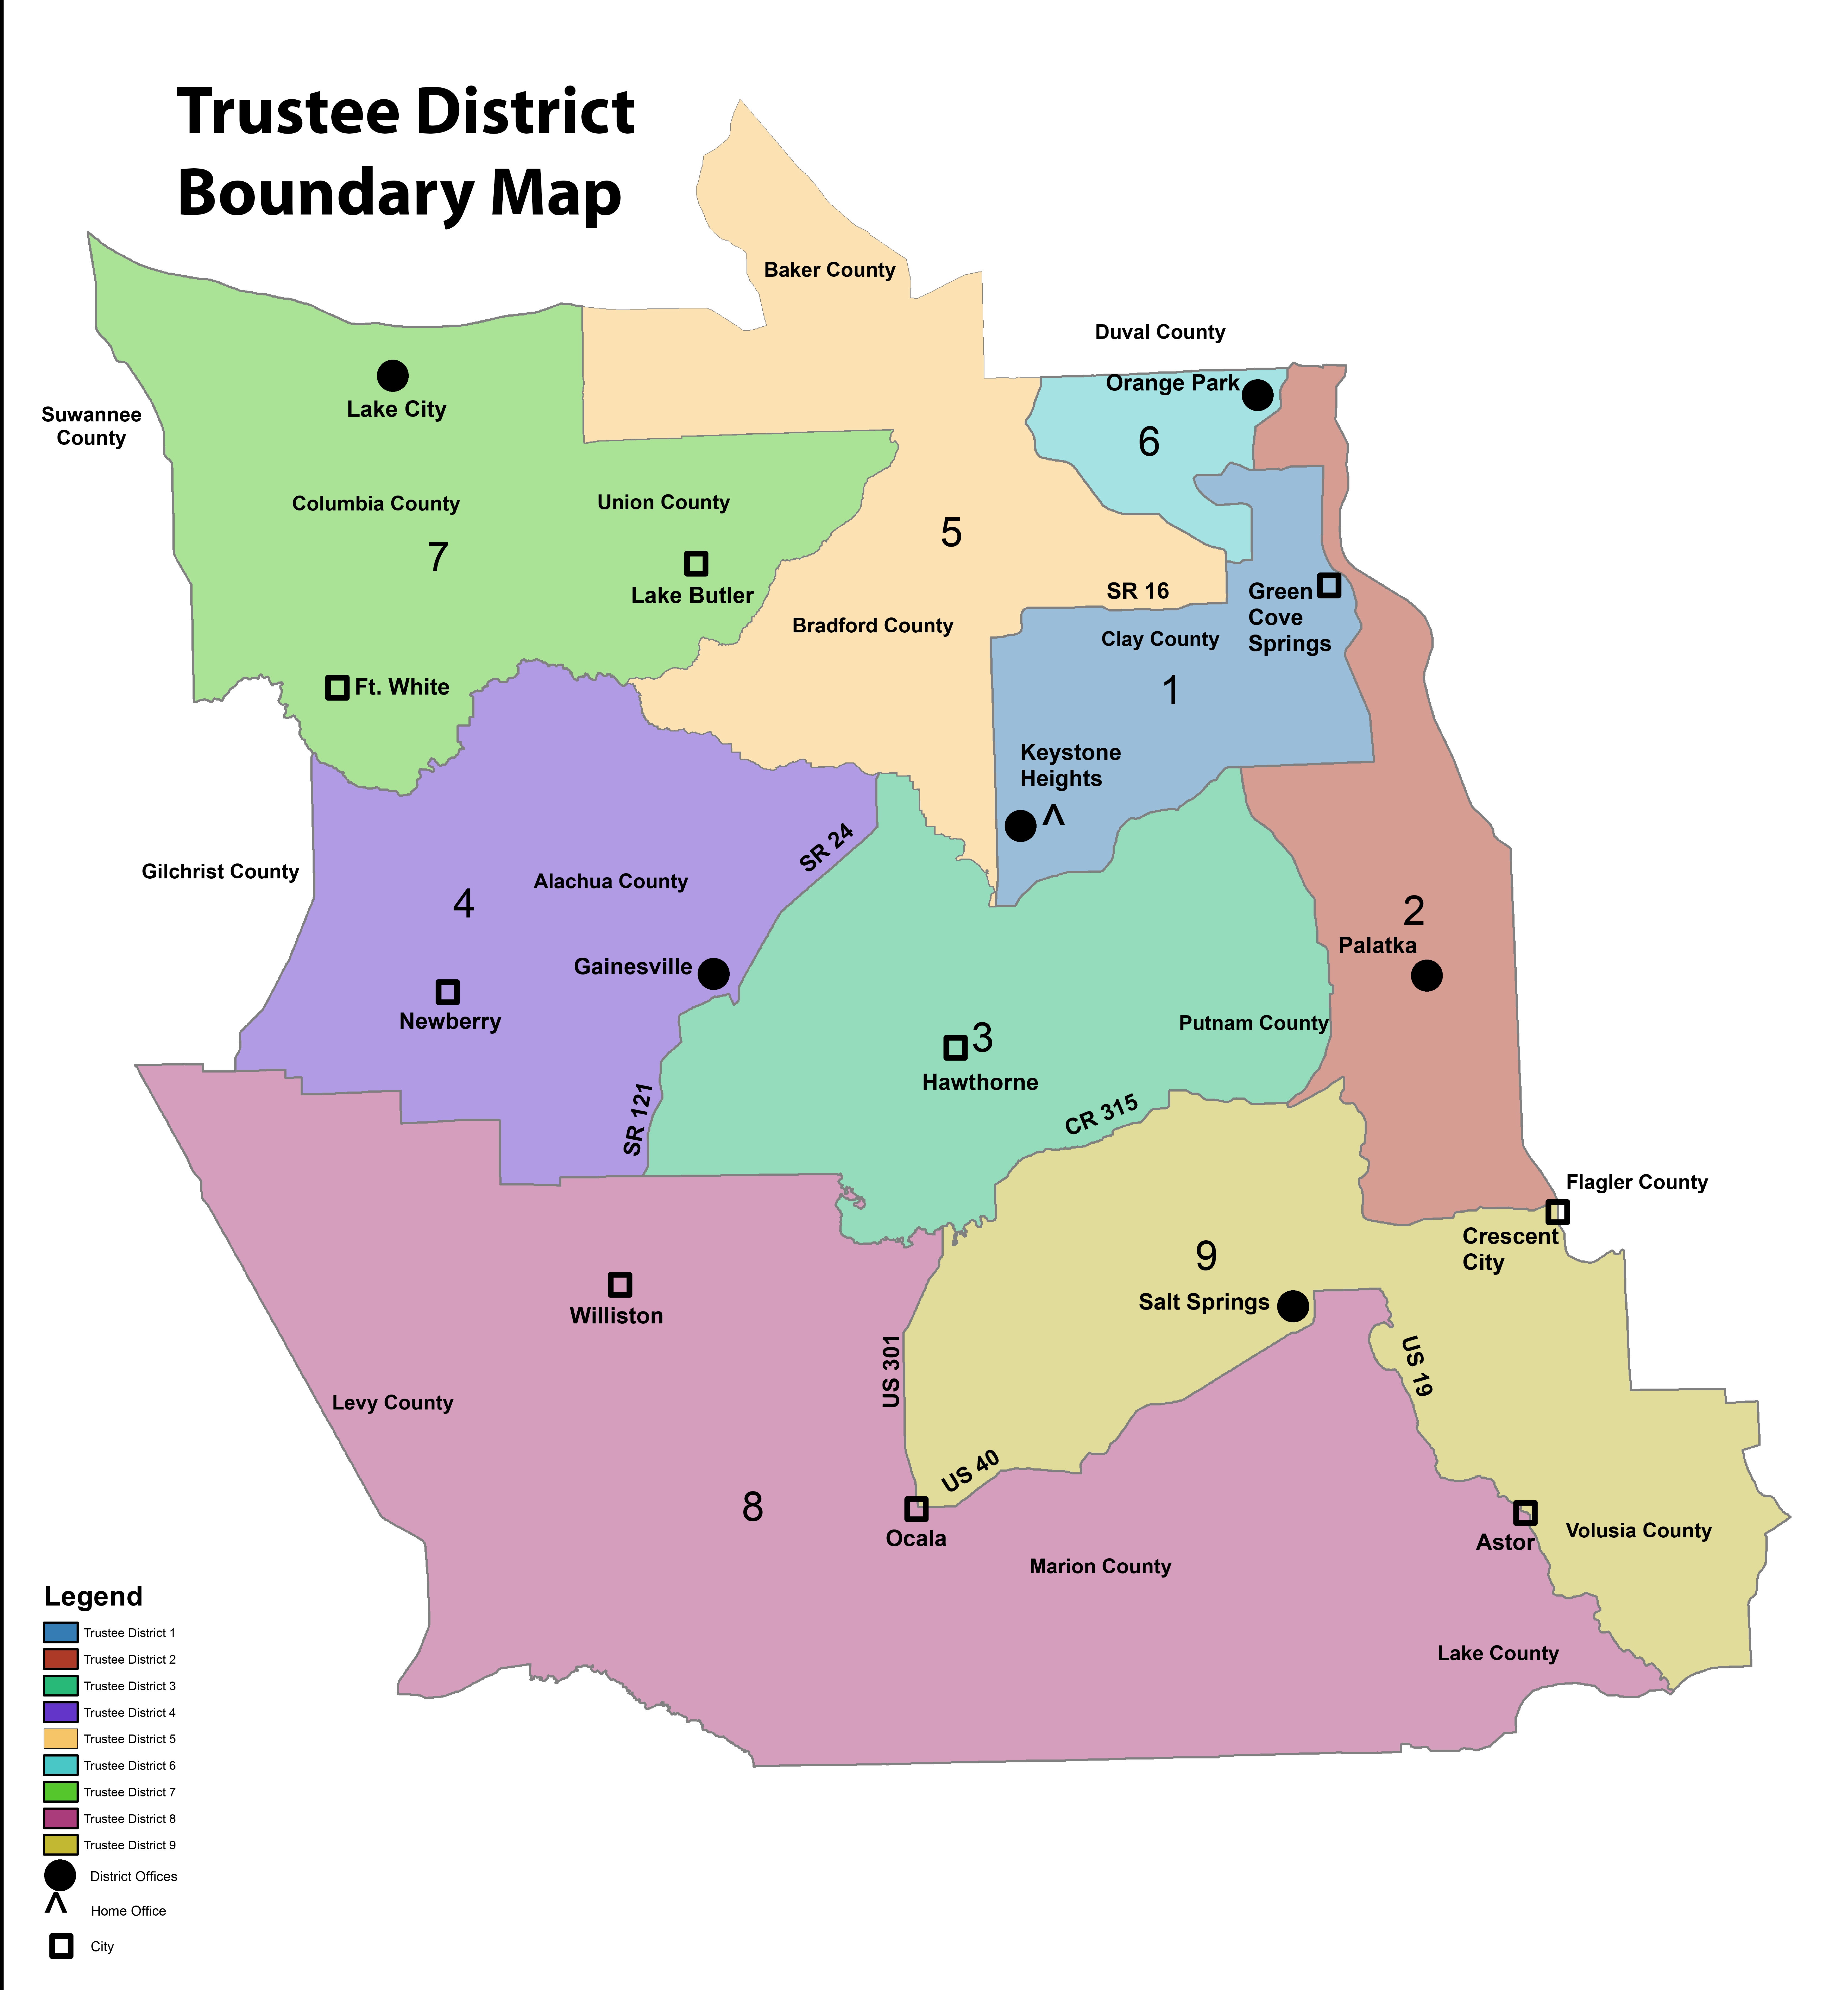 Trustee District Boundary Map